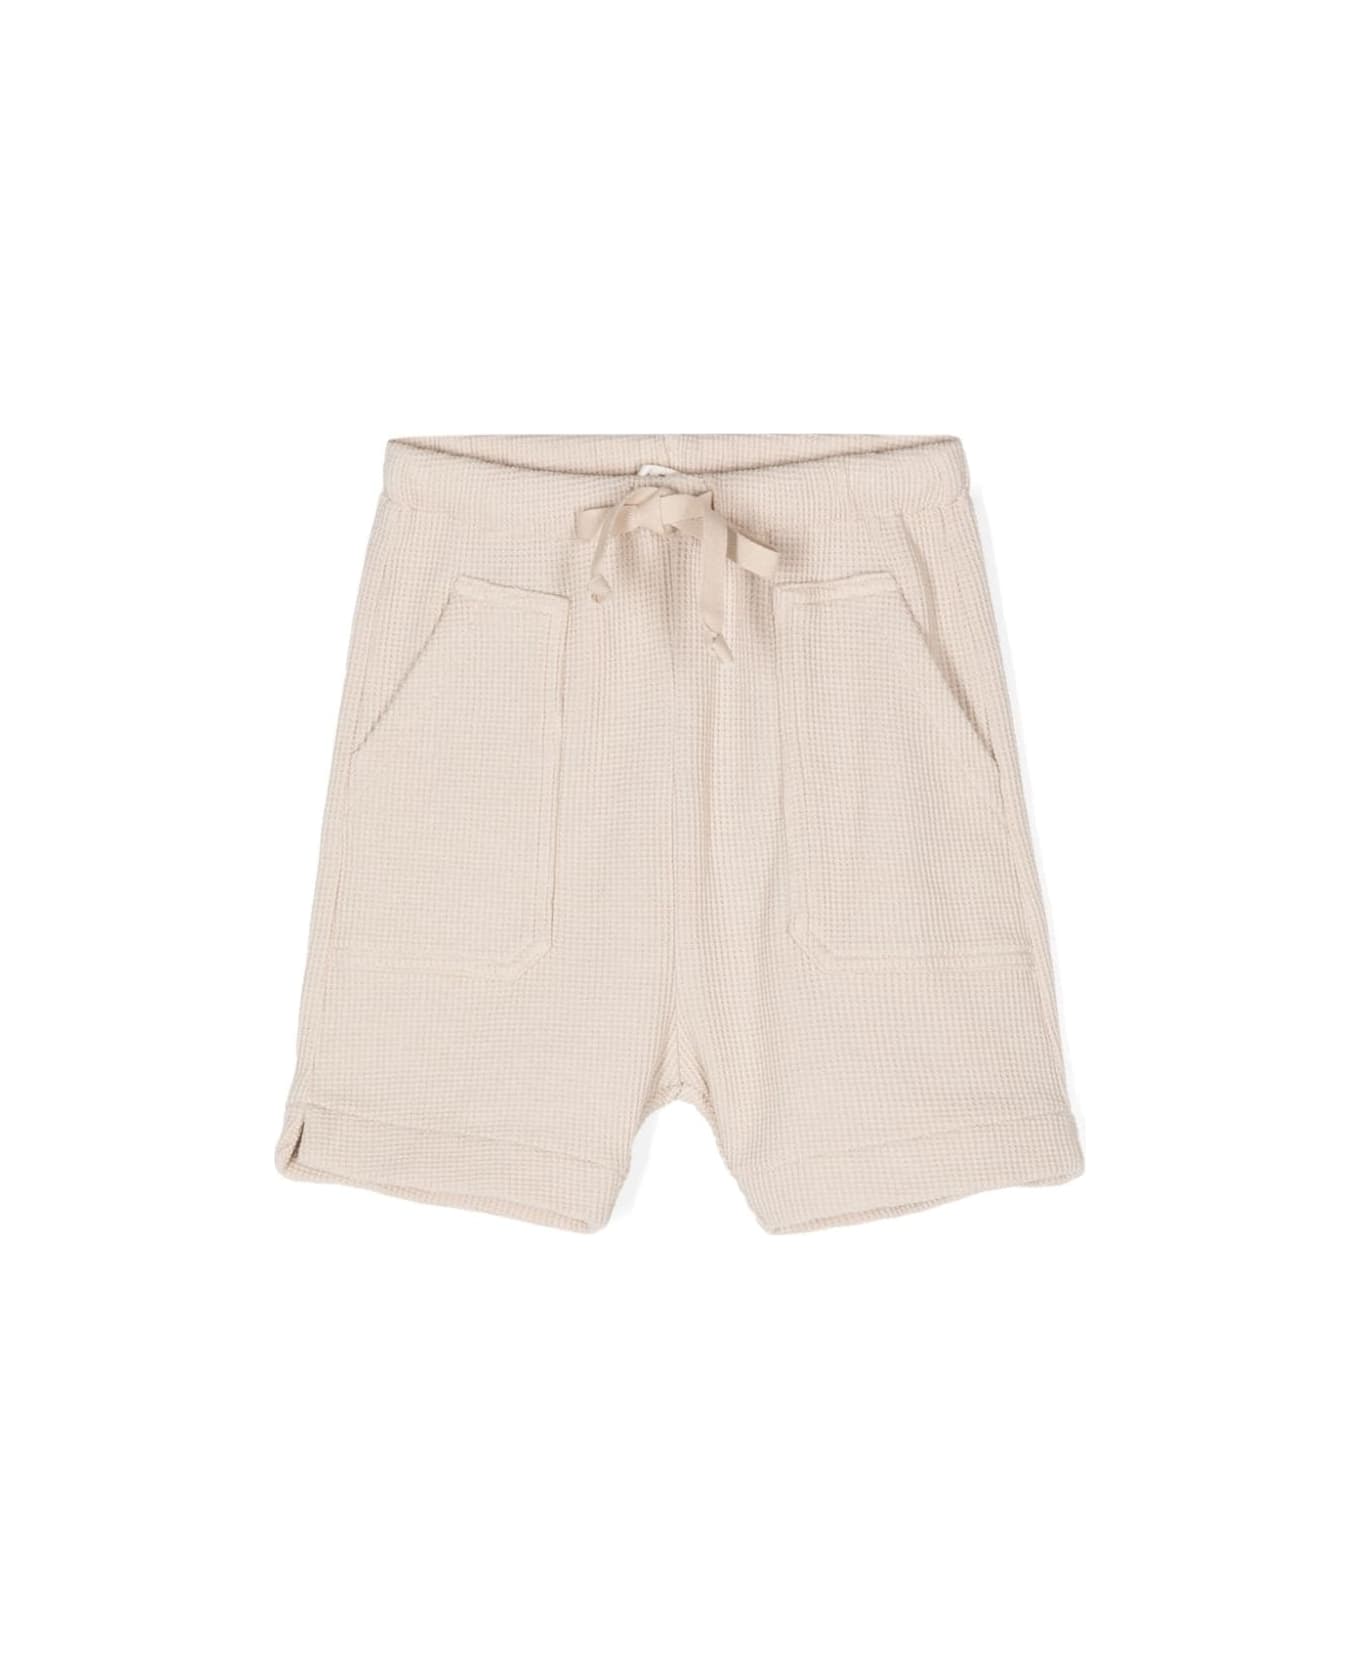 Zhoe & Tobiah Shorts Con Coulisse - Beige ボトムス